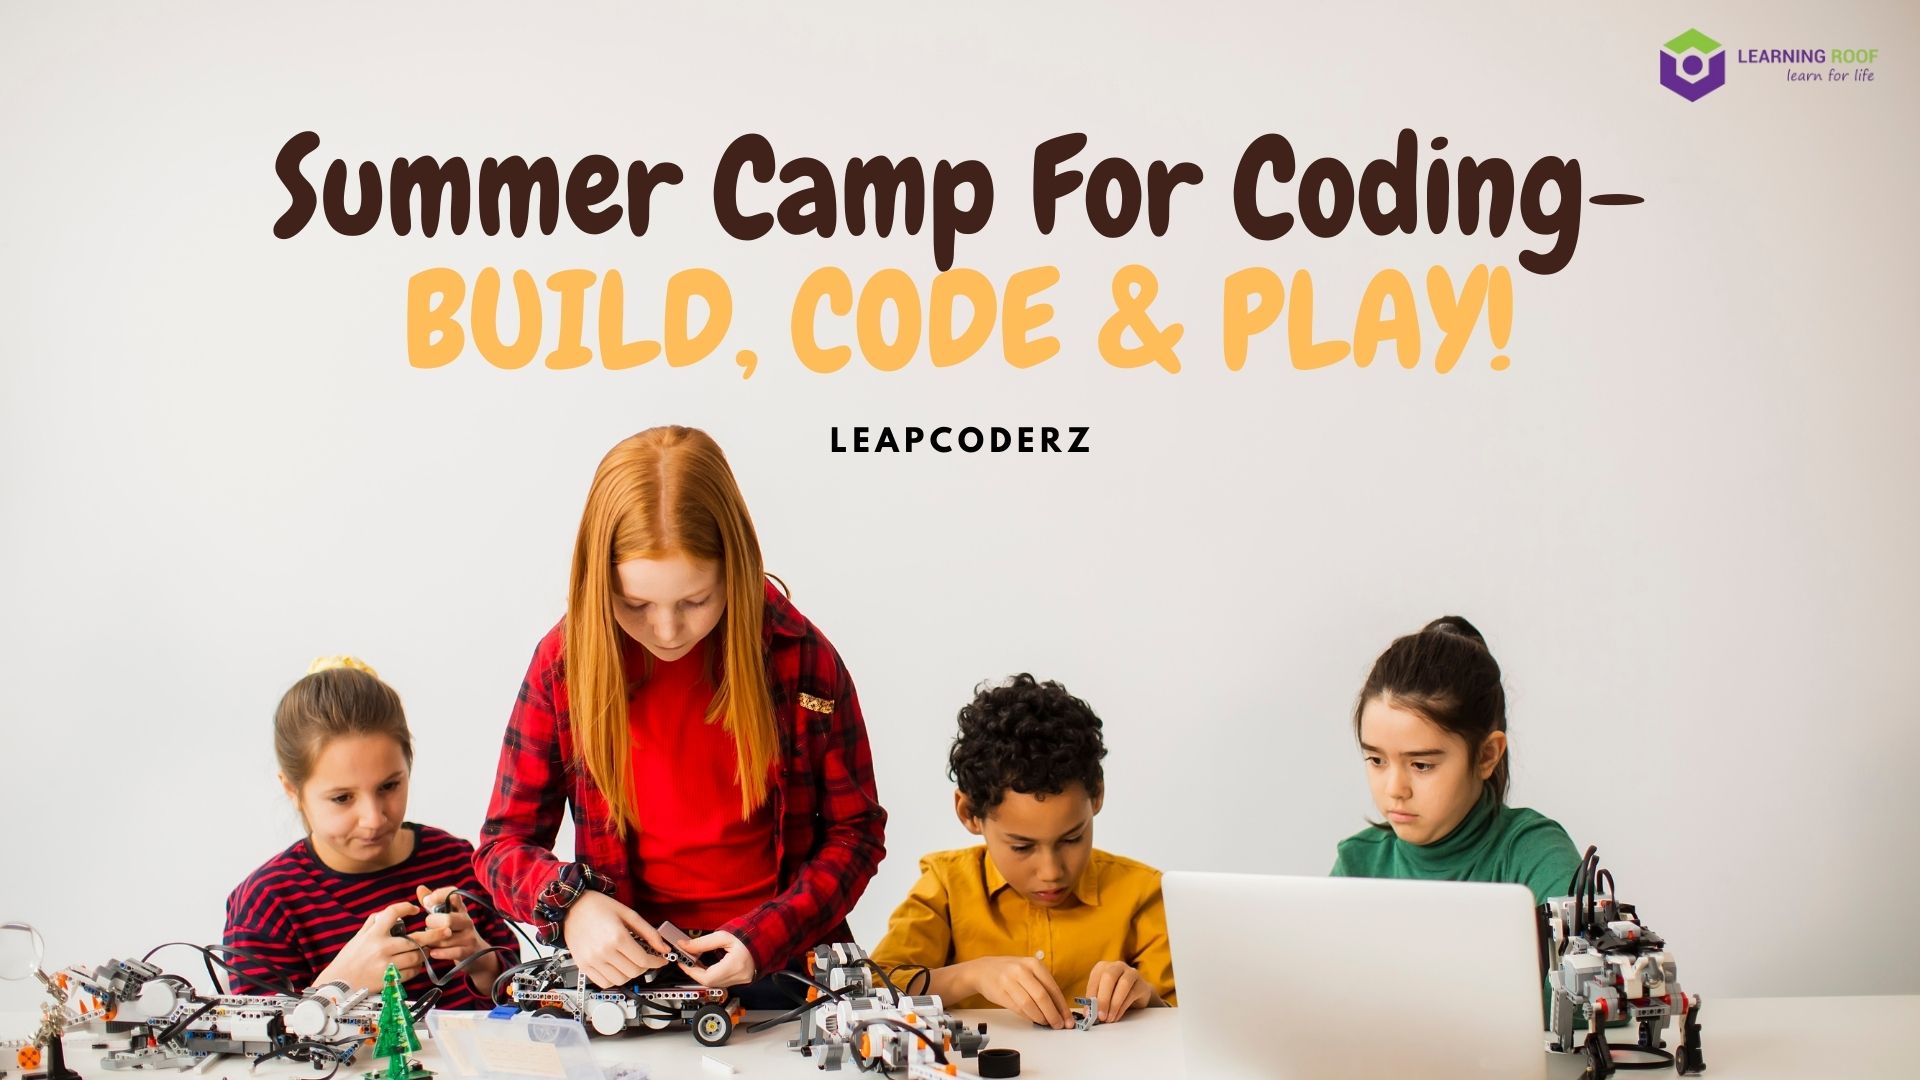 Summer Camp For Coding Build, Code & Play! Learning Roof